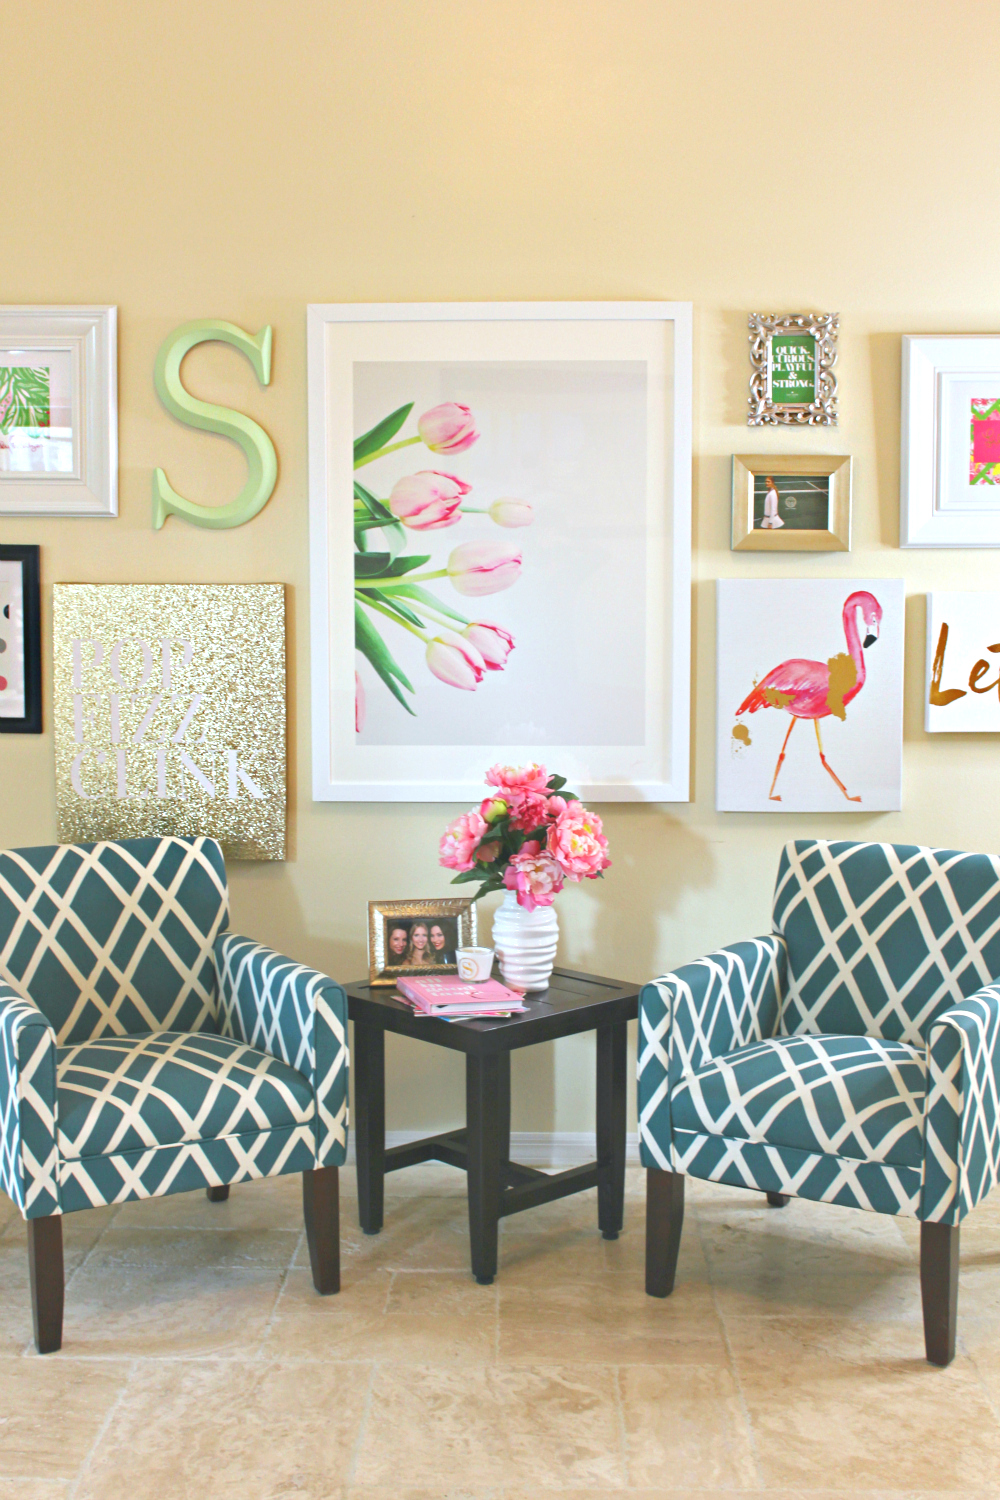 Lilly Pulitzer-Inspired Wall Art Collage | Diary of a ...